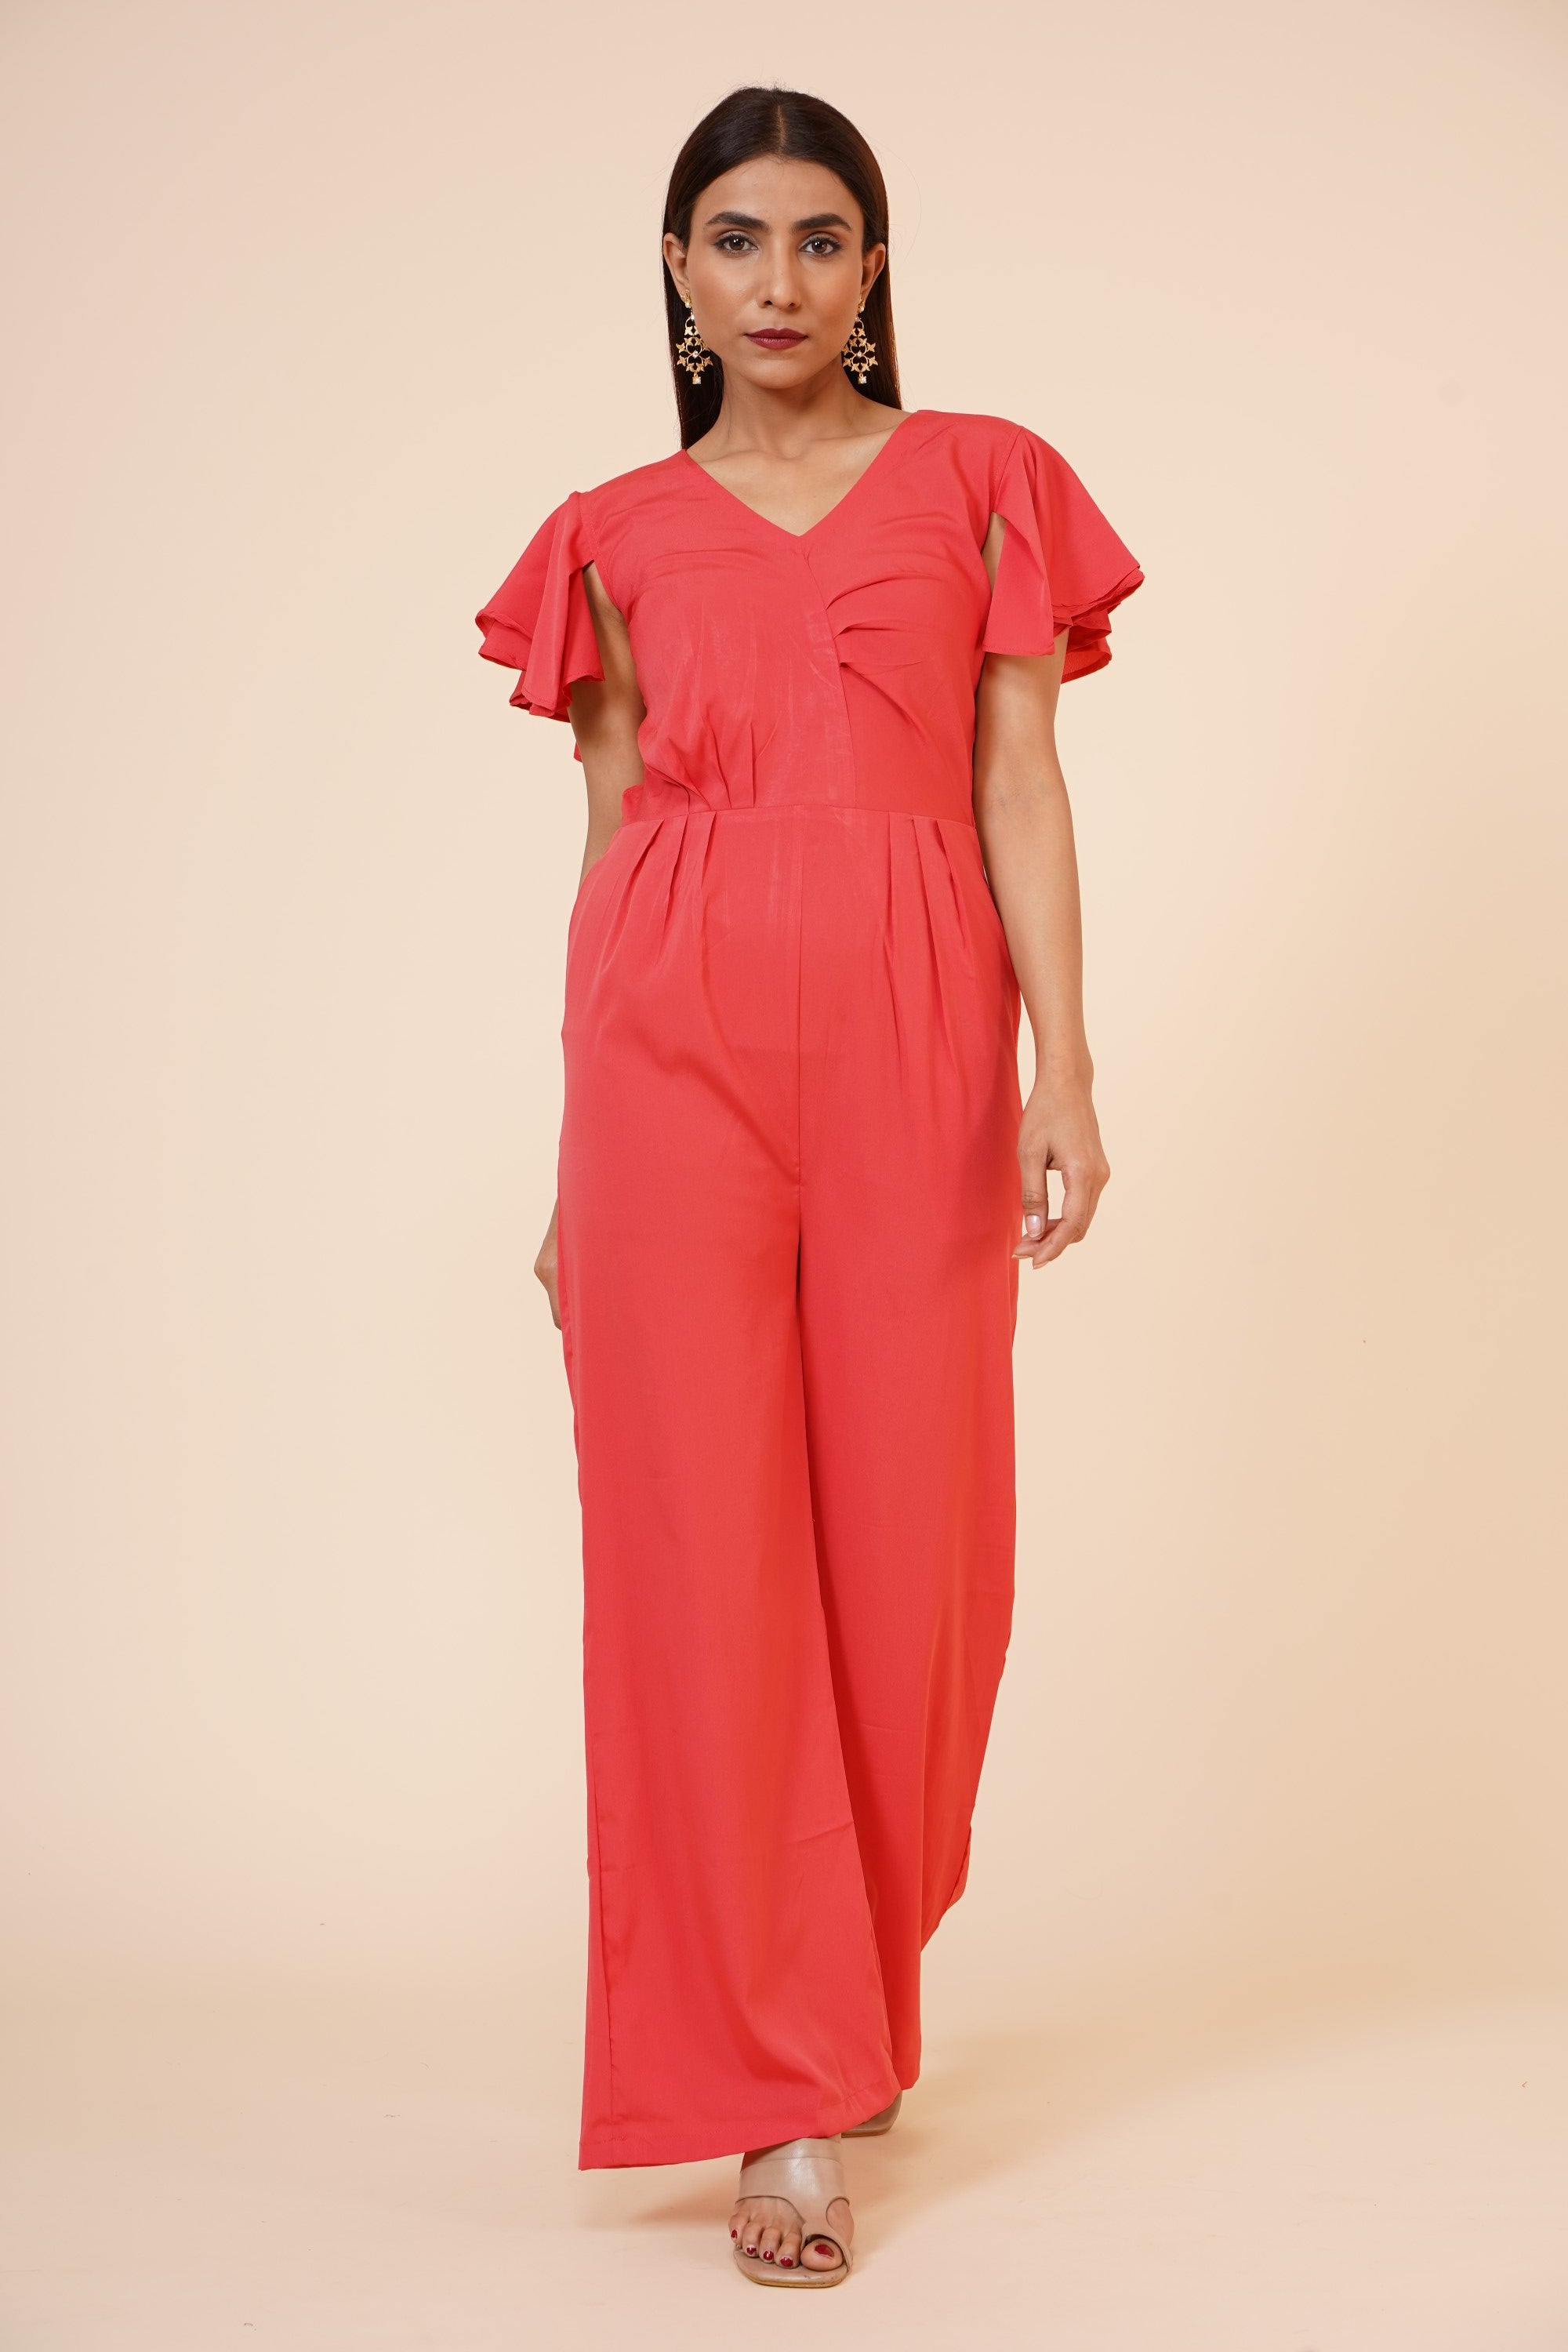 Women's Drape  Party/ Casual Jumpsuit In Peach - MIRACOLOS by Ruchi